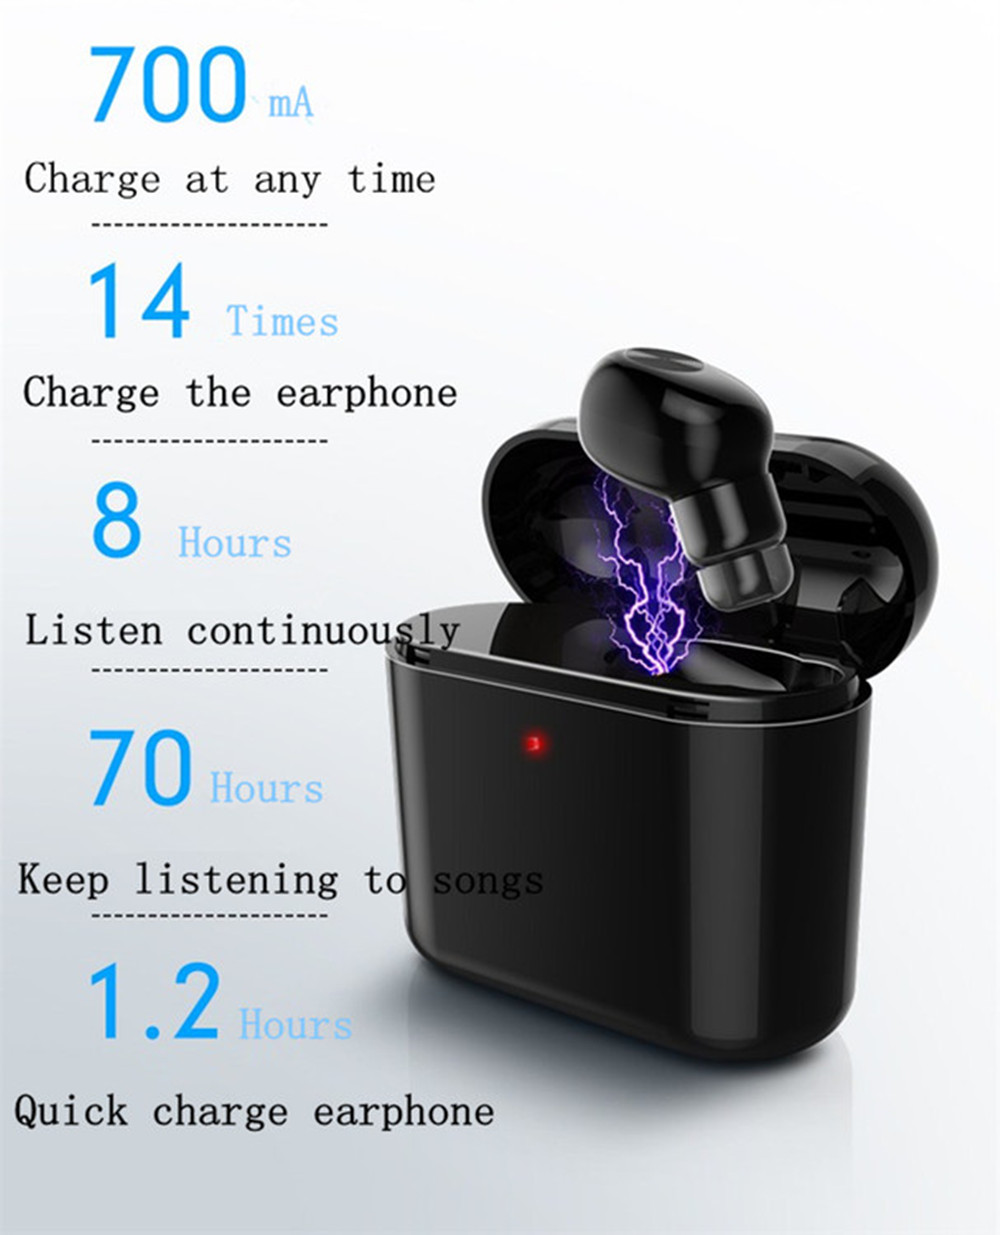 Wireless Bluetooth Earphone,Mini Bluetooth Earbud, Single Wireless Earbud with 48 Hour Battery Life - 700 mAh Charging Case, Invisible Headphone Earpiece 1pc Black - image 2 of 9